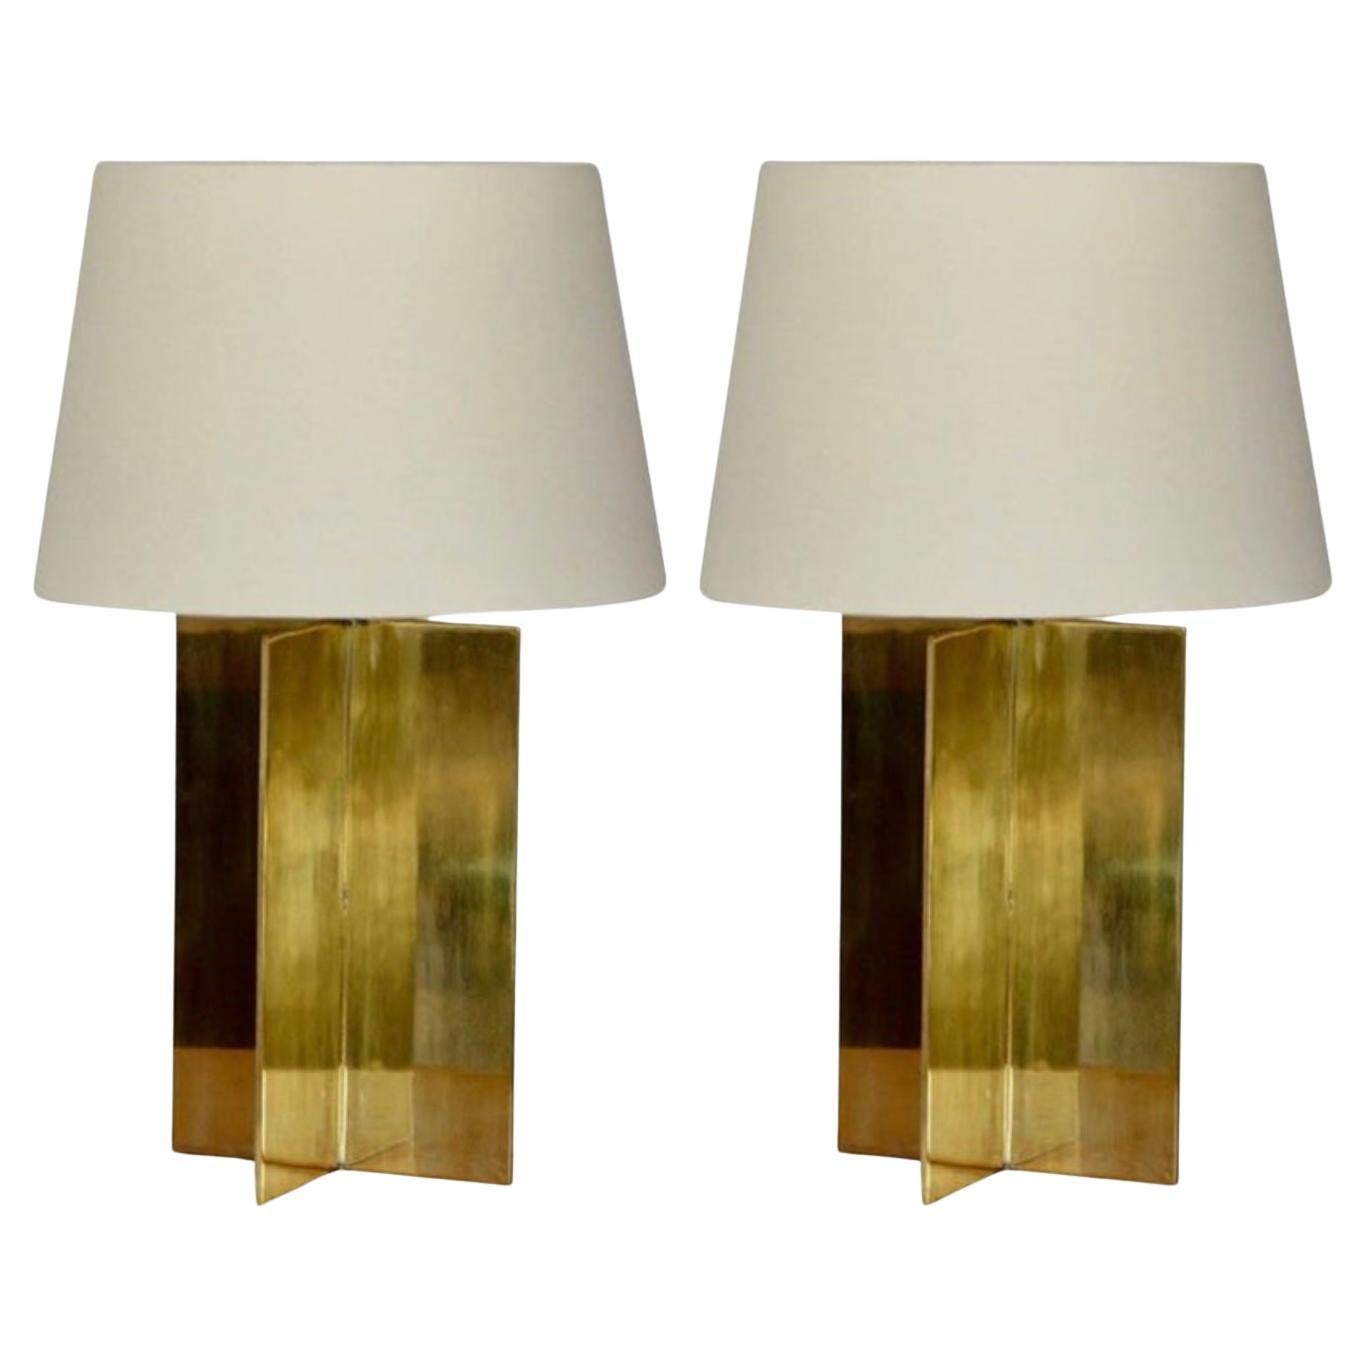 Pair of 'Croisillon' Solid Brass and Parchment Lamps by Design Frères